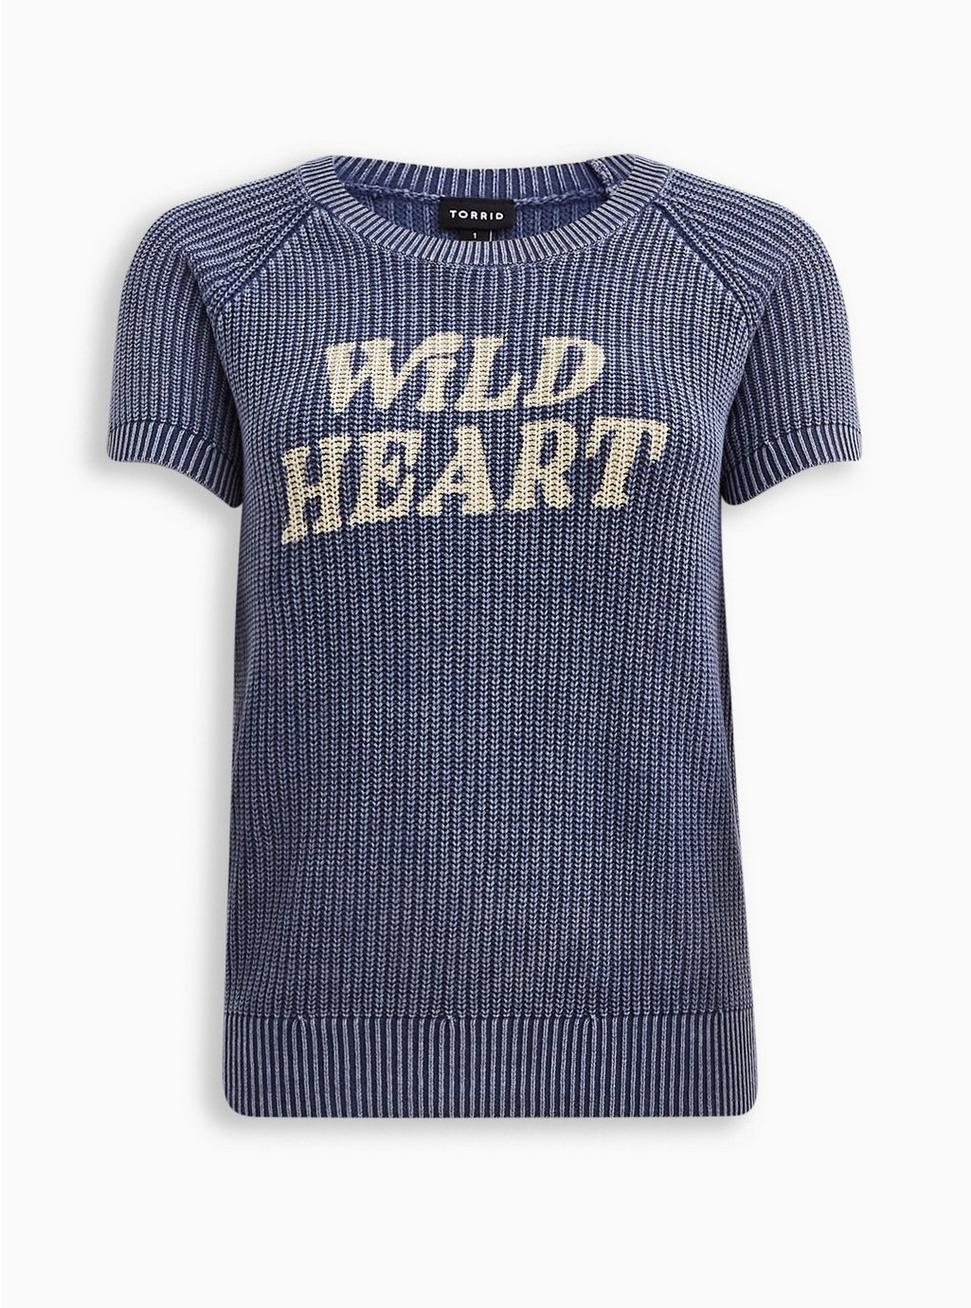 Wild Heart Pullover Sweater, BLUE, hi-res